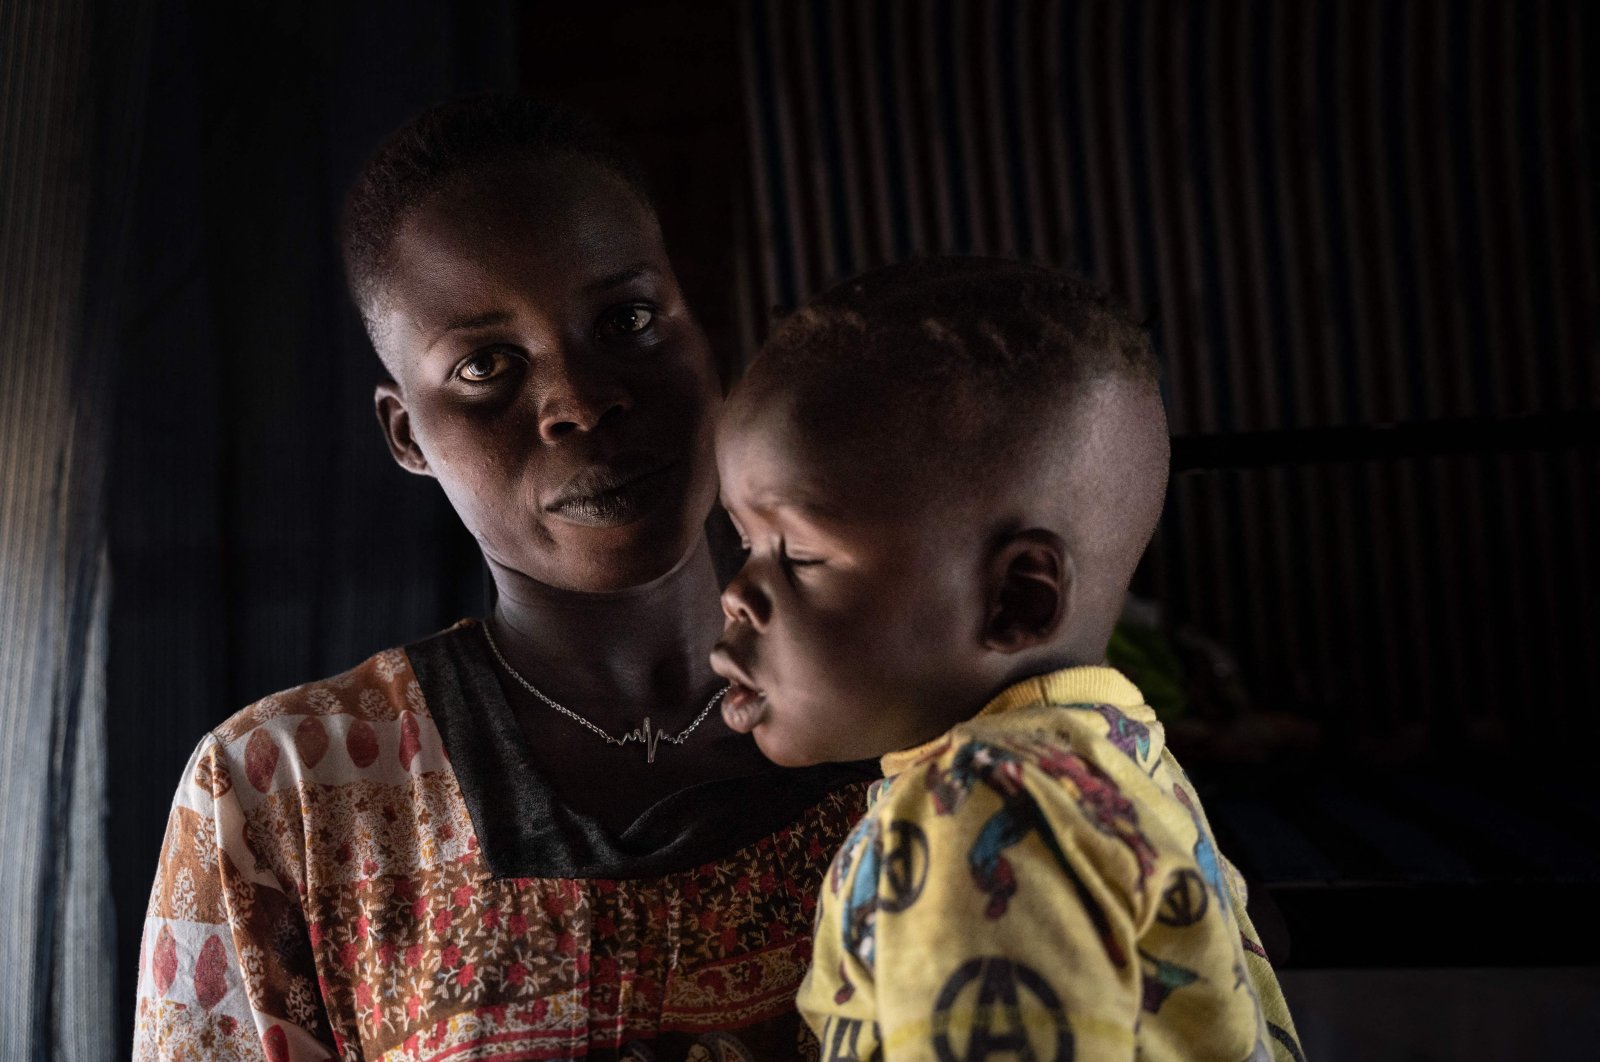 South Sudanese asylum seeker Nyalada Gatkouth Jany (L) who tried to cross the Mediterranean Sea four times and imprisoned in Libya, sits with her 1-year-old child, Rwanda, June 10, 2022. (AFP Photo)